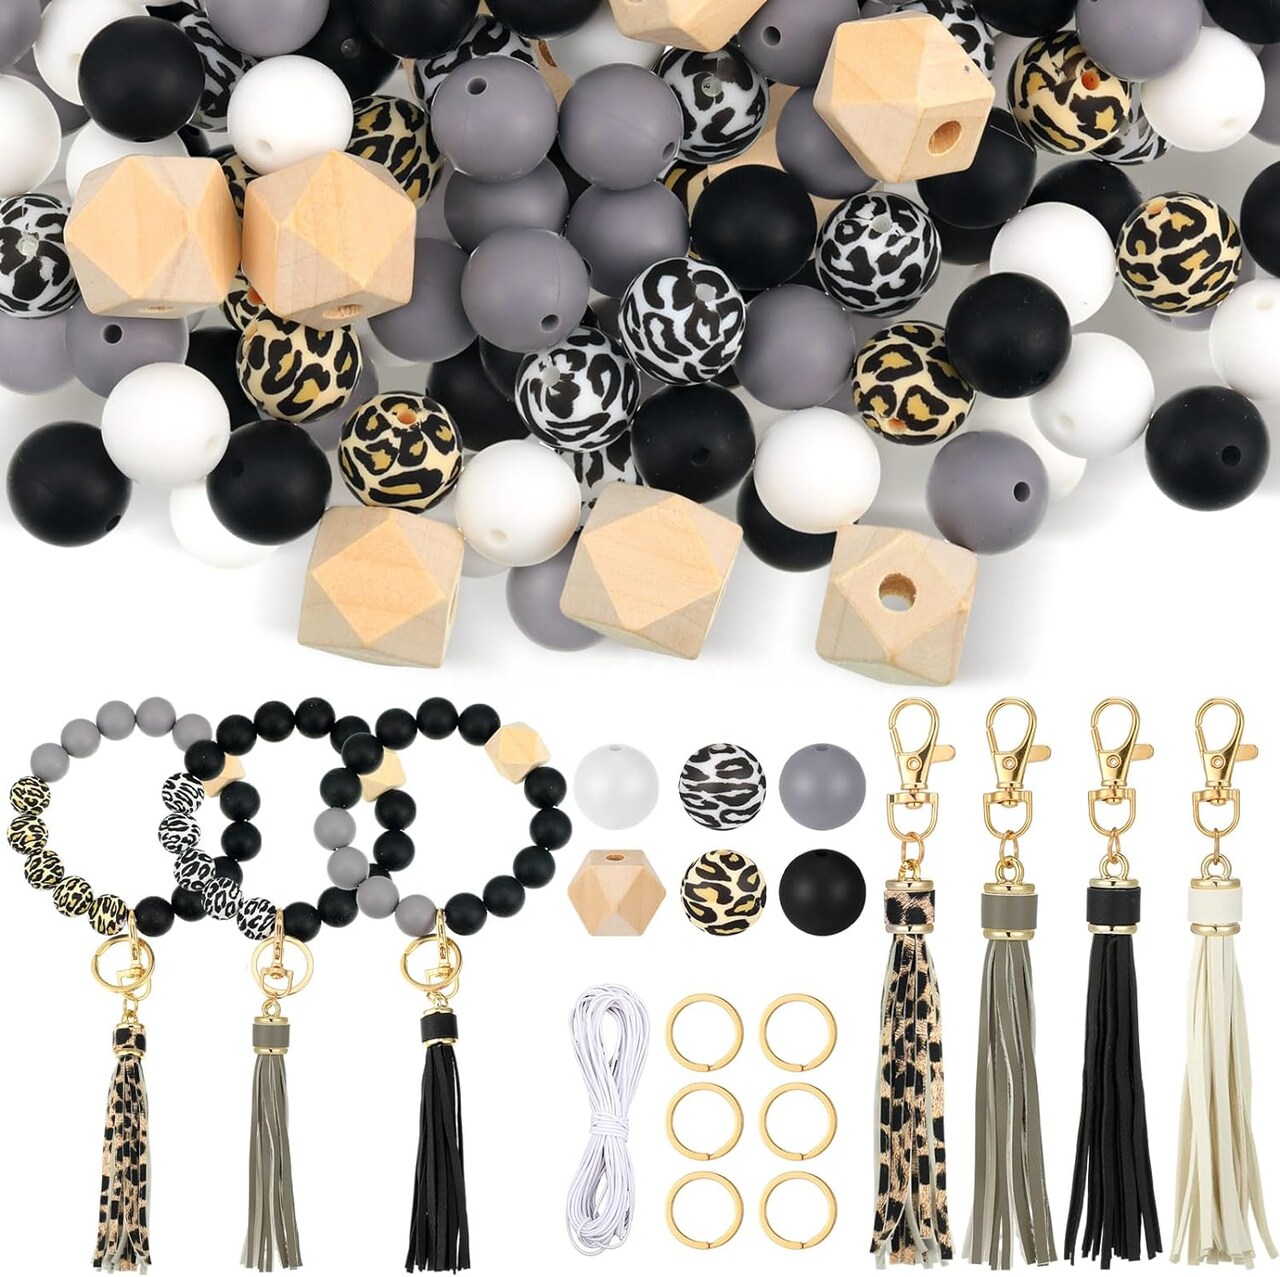 15 mm Silicone Beads for Keychain Making Kit 100 pcs